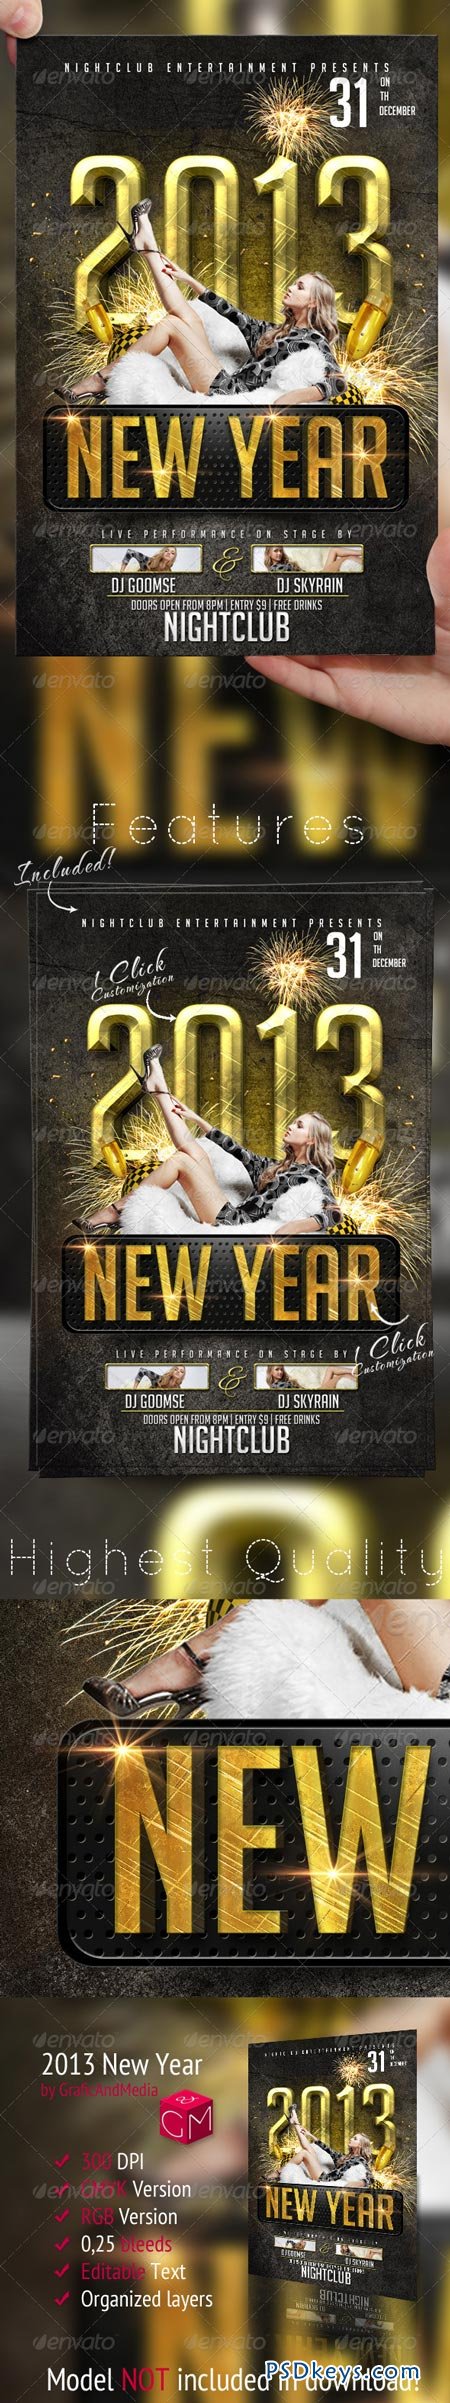 2013 New Year Flyer Template 3395498